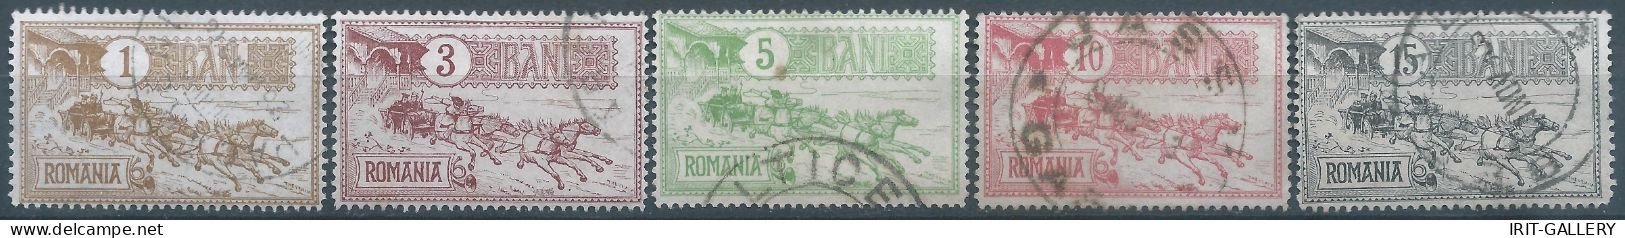 ROMANIA - ROUMANIE - RUMANIEN,1903 Horses - Mail Coach,Oblitérée,Value:€11,00 - Used Stamps